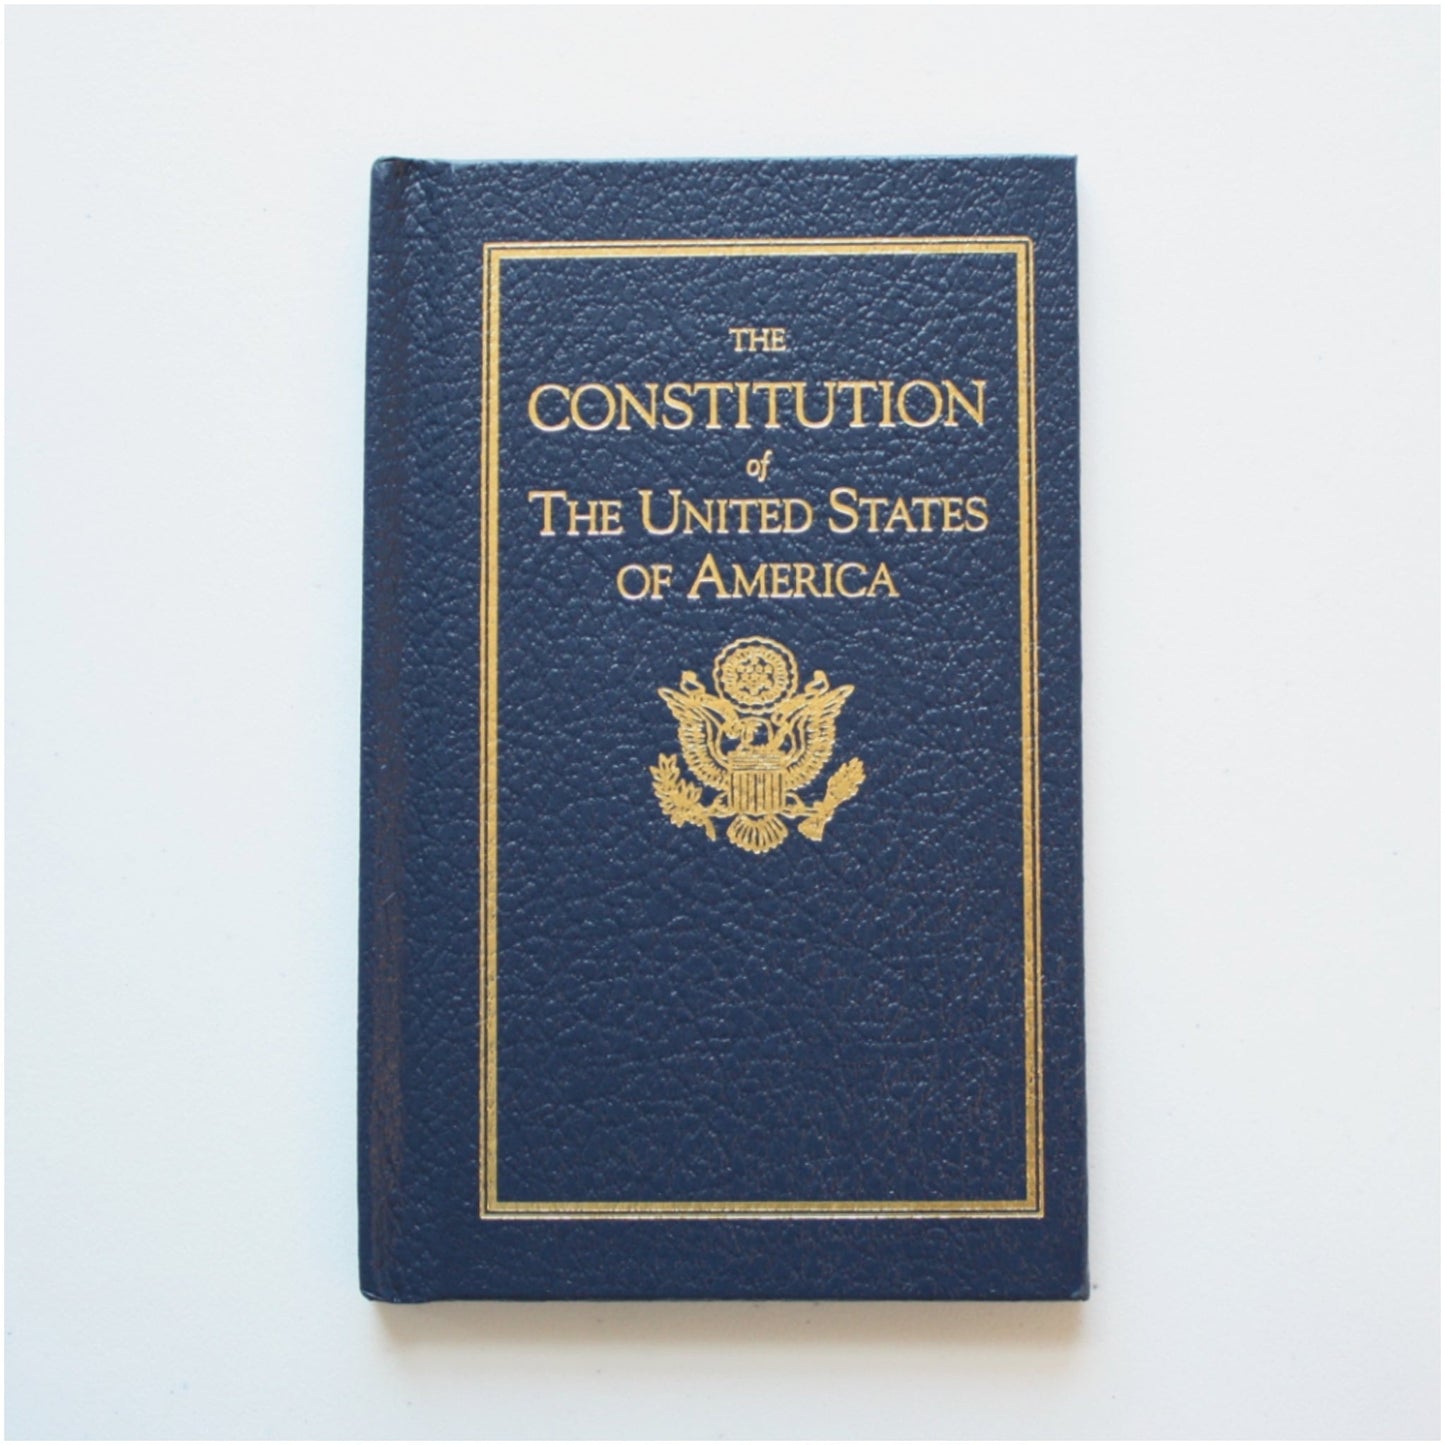 Constitution of the United States of America - Made in the USA